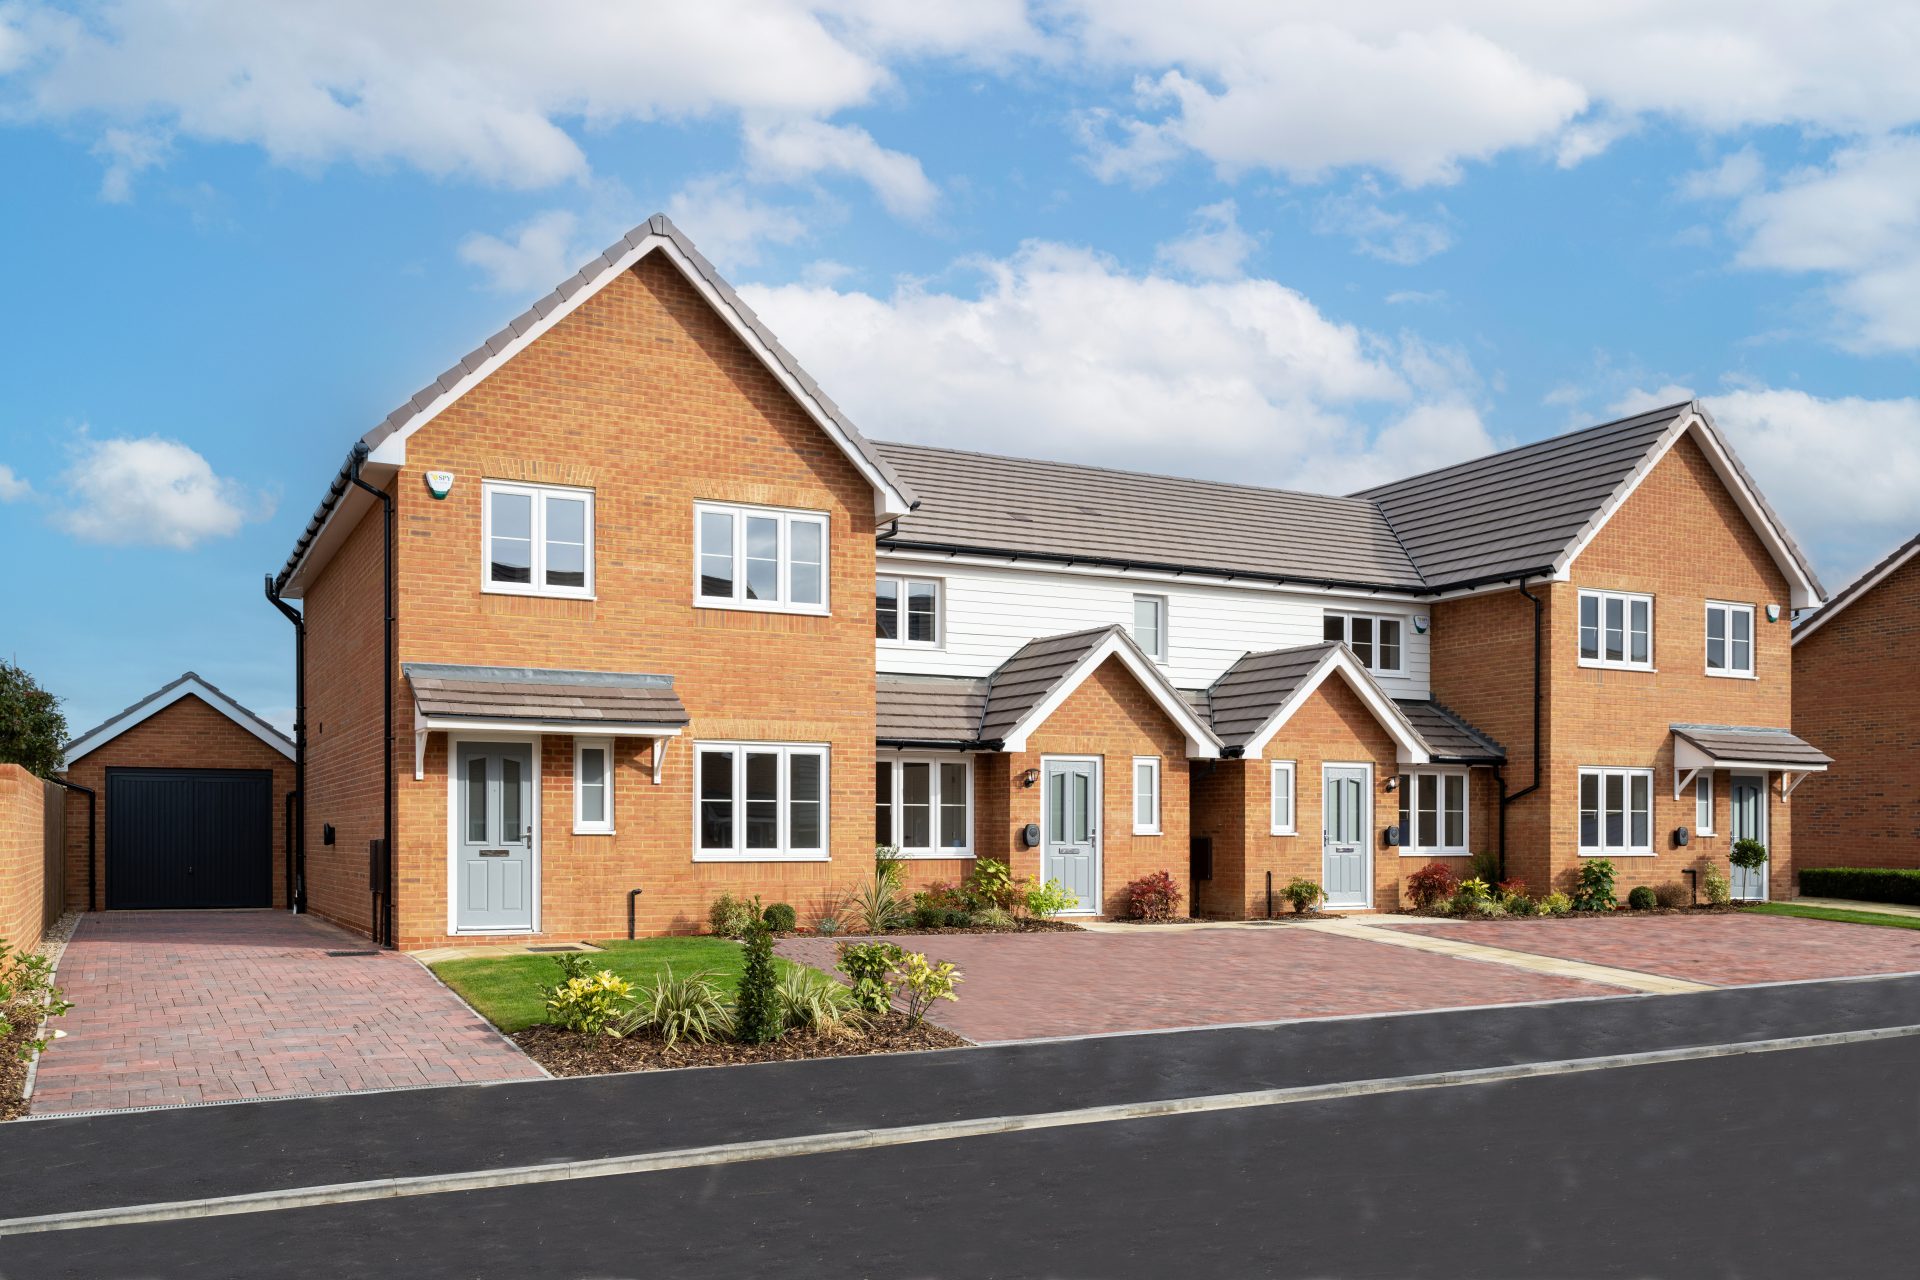 Homebuyers invited to Open House Weekend at two Jones Homes developments in kent